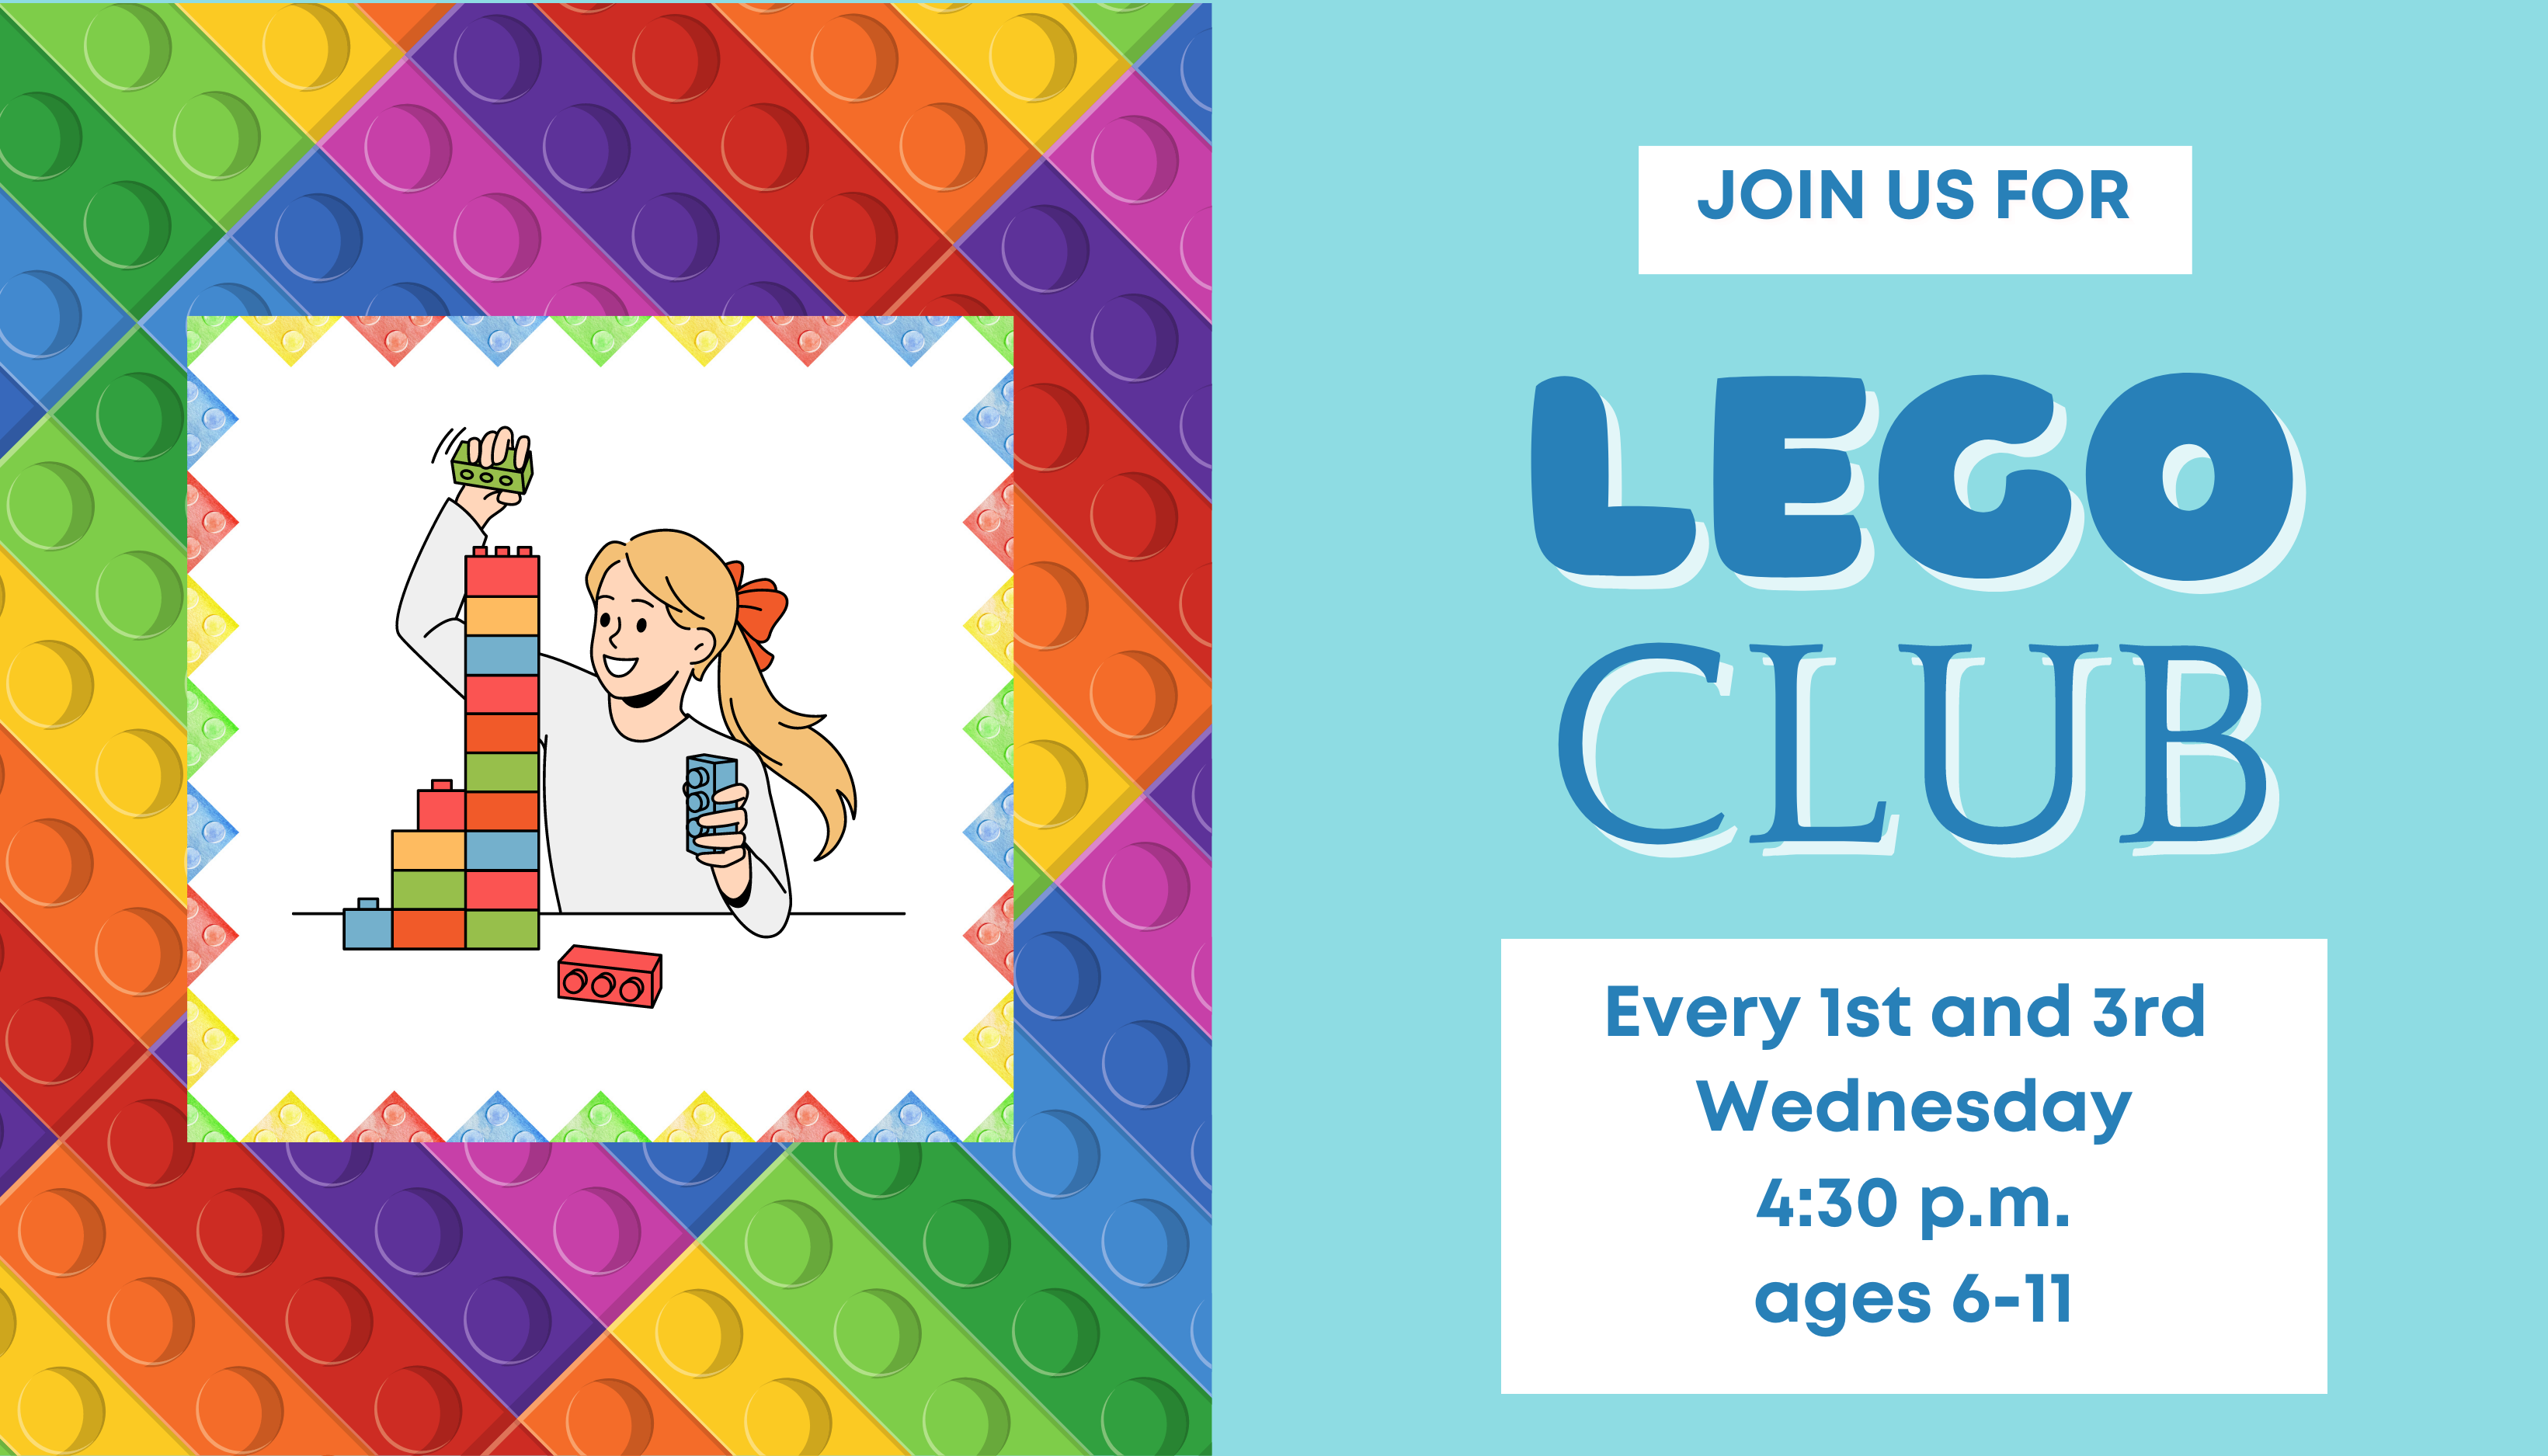 LEGO Club is the 1st and 3rd Wednesday of each month at 4:30 p.m.